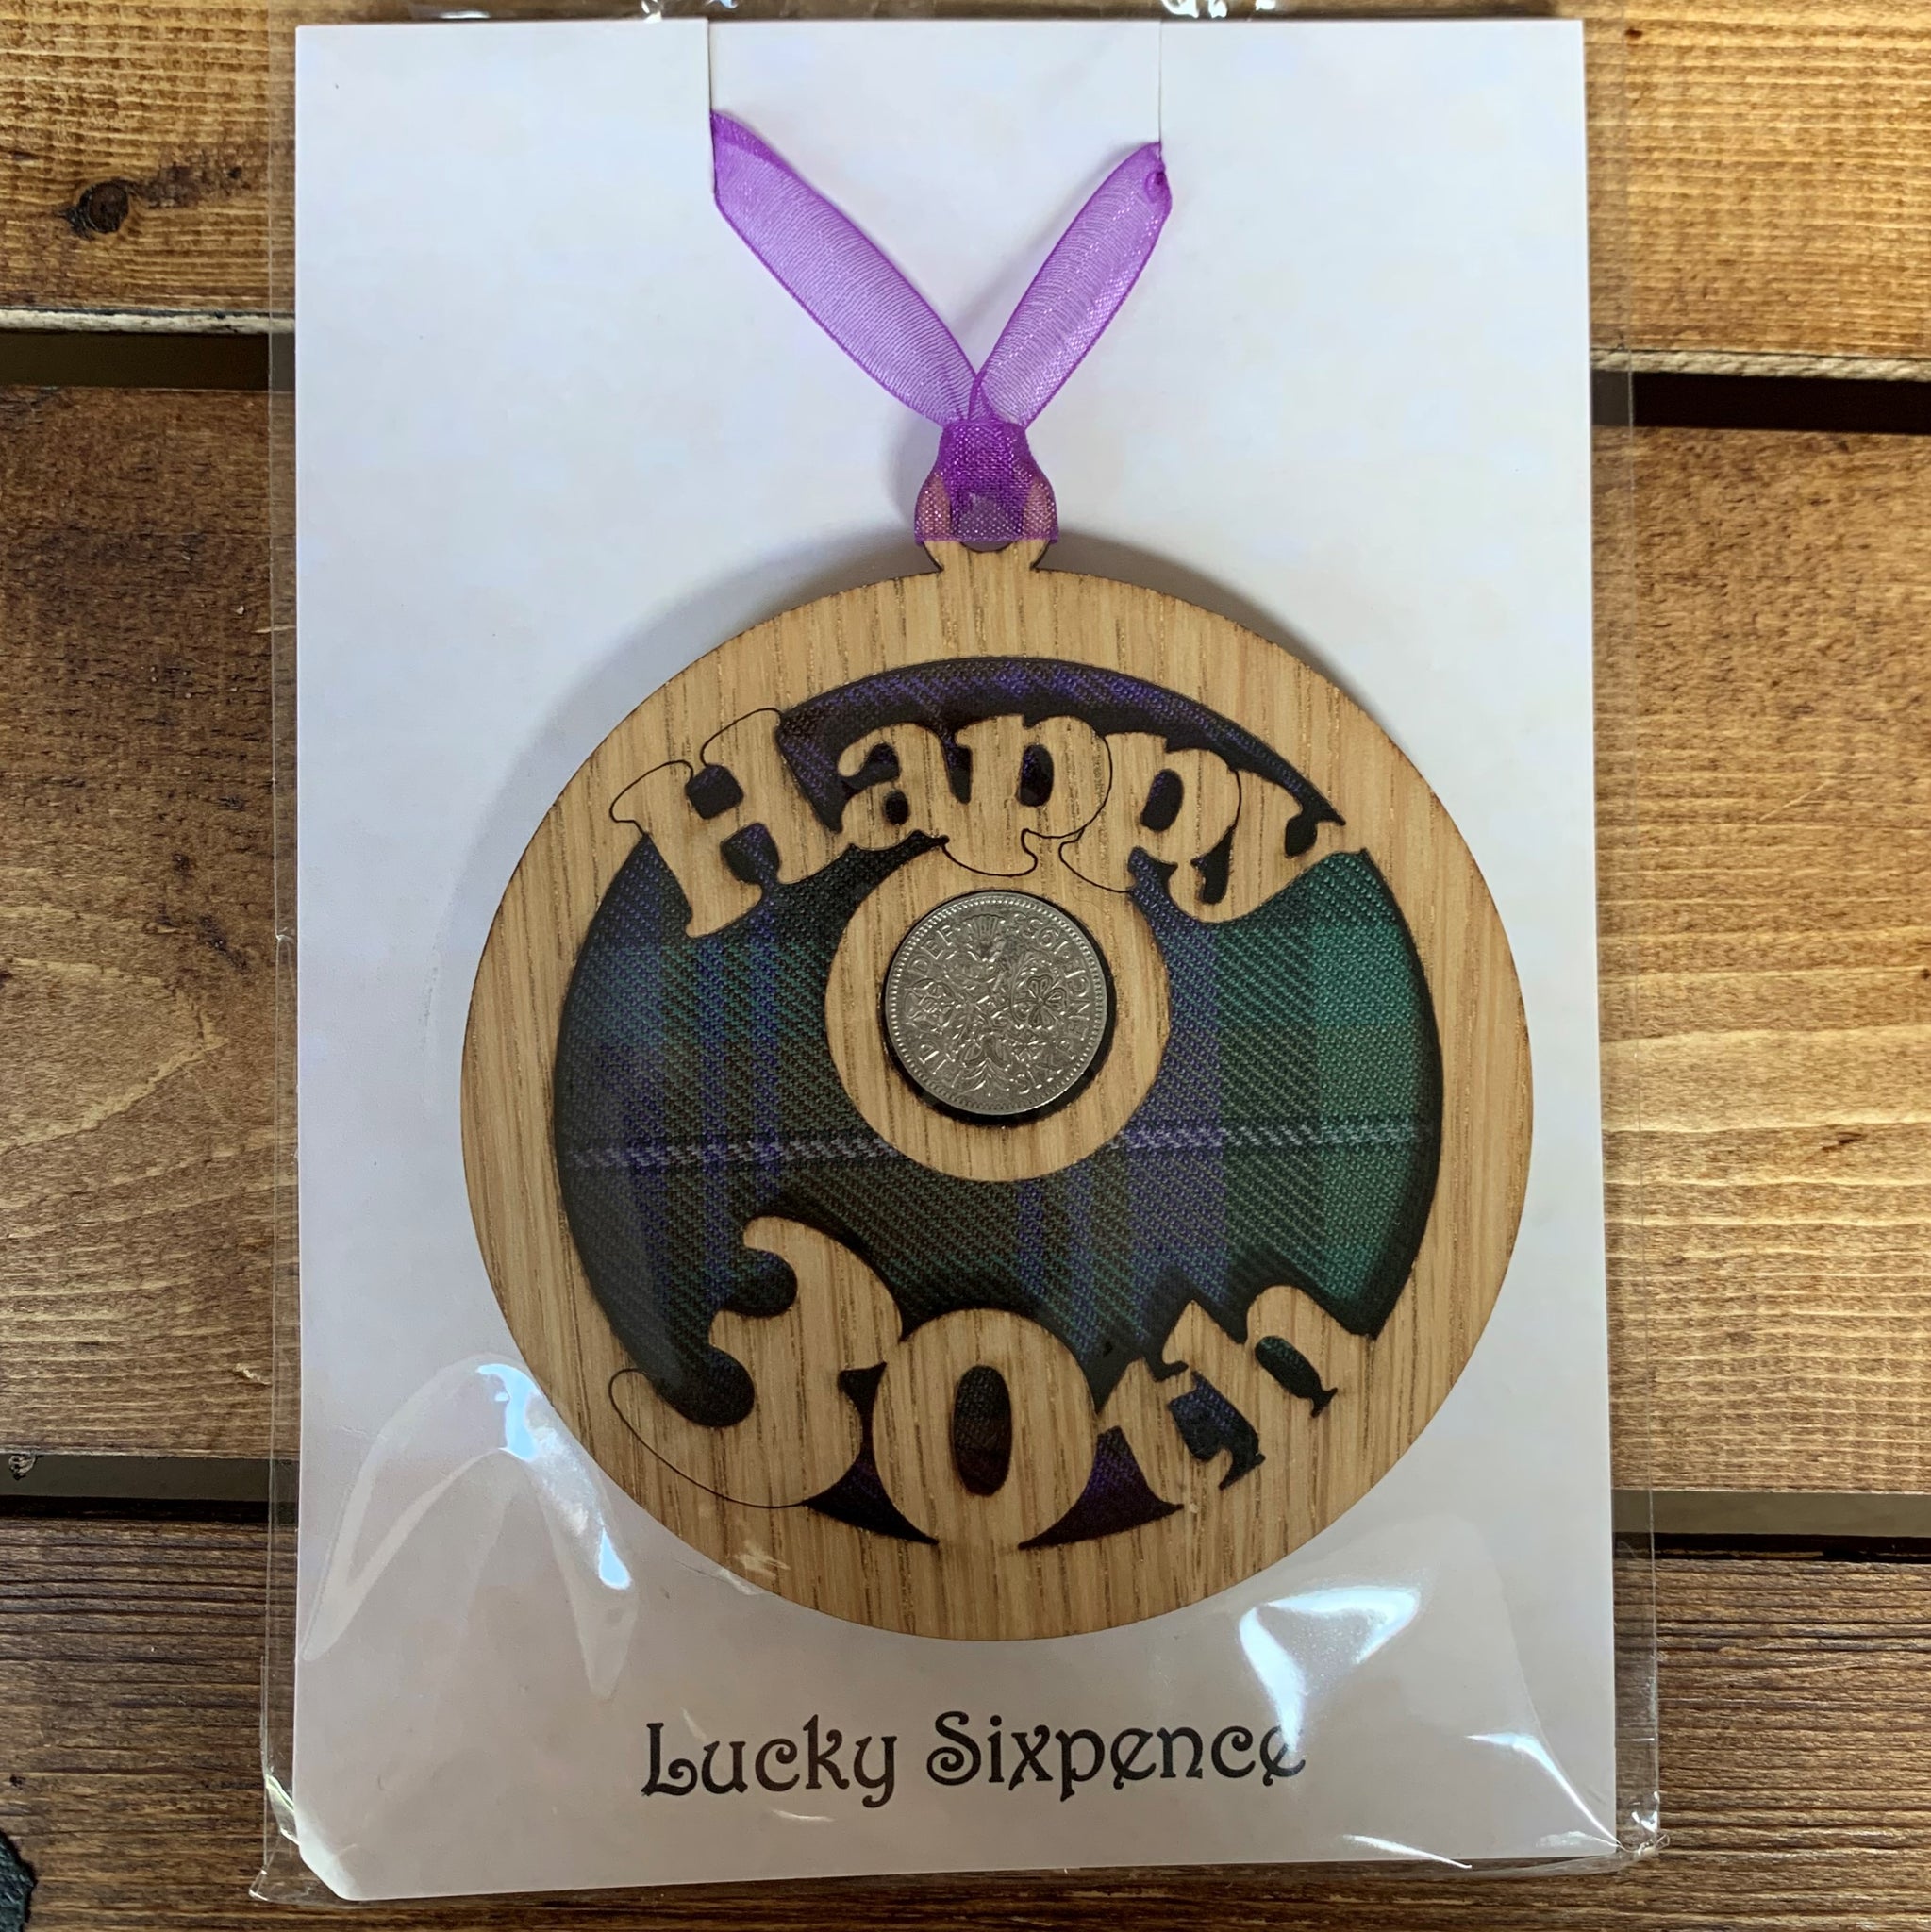 A unique keepsake gift with a Scottish twist.  The sixpence is mounted onto a round hanging oak veneered wood with tartan inserts, mounted on card and packaged in clear cellophane packets.  'Happy 30th' is cut into the wooden hanging.